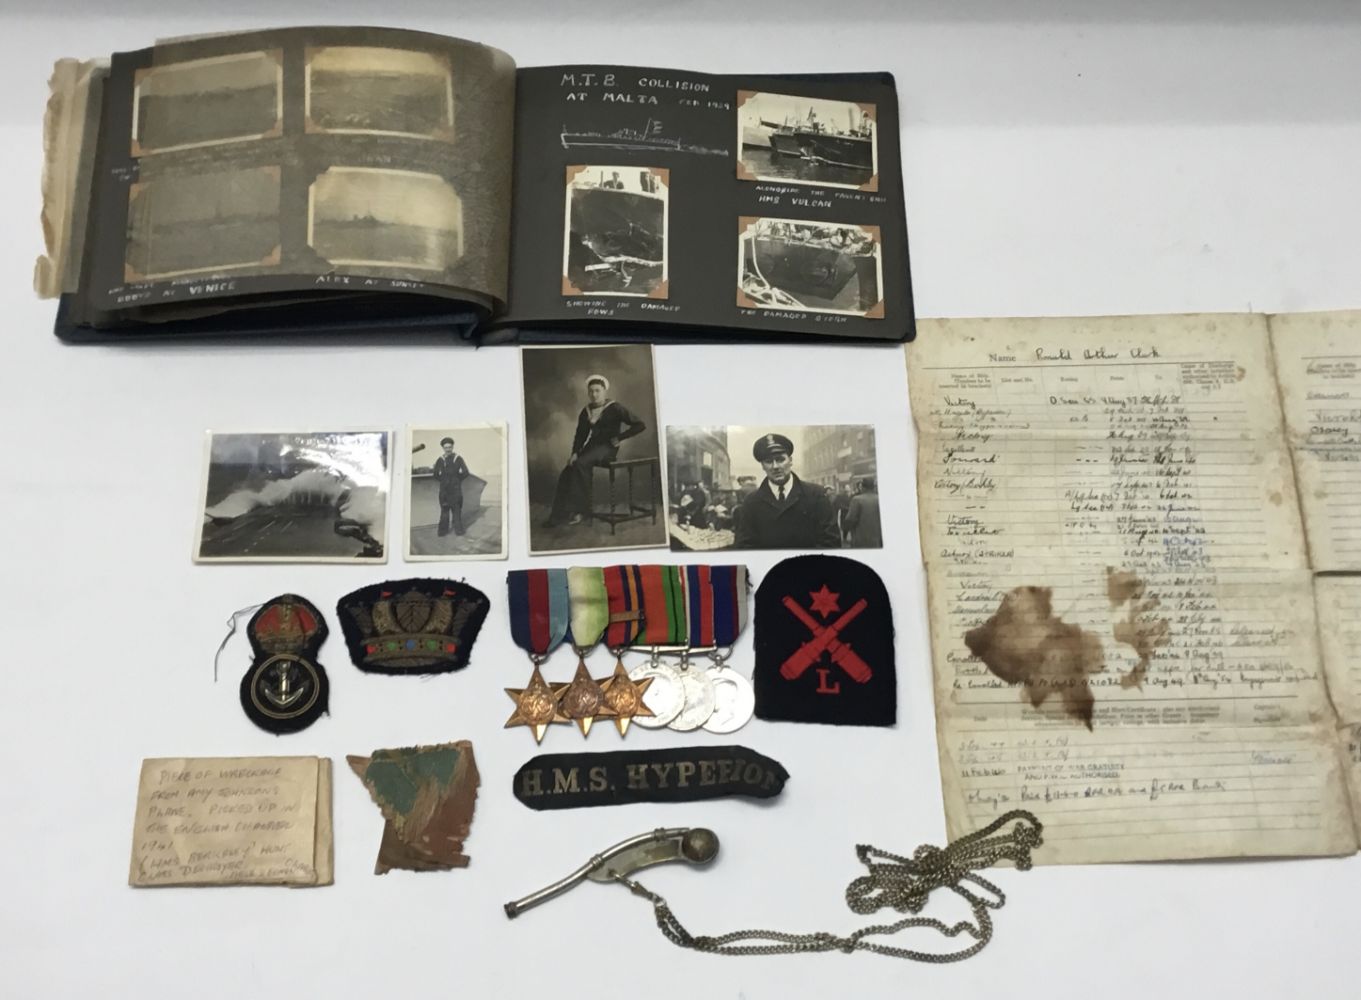 February Medals, Militaria & Firearms Auction - Viewing by Appointment - Live Web Broadcast & Bidding - Postage and Safe Click/Collect Only